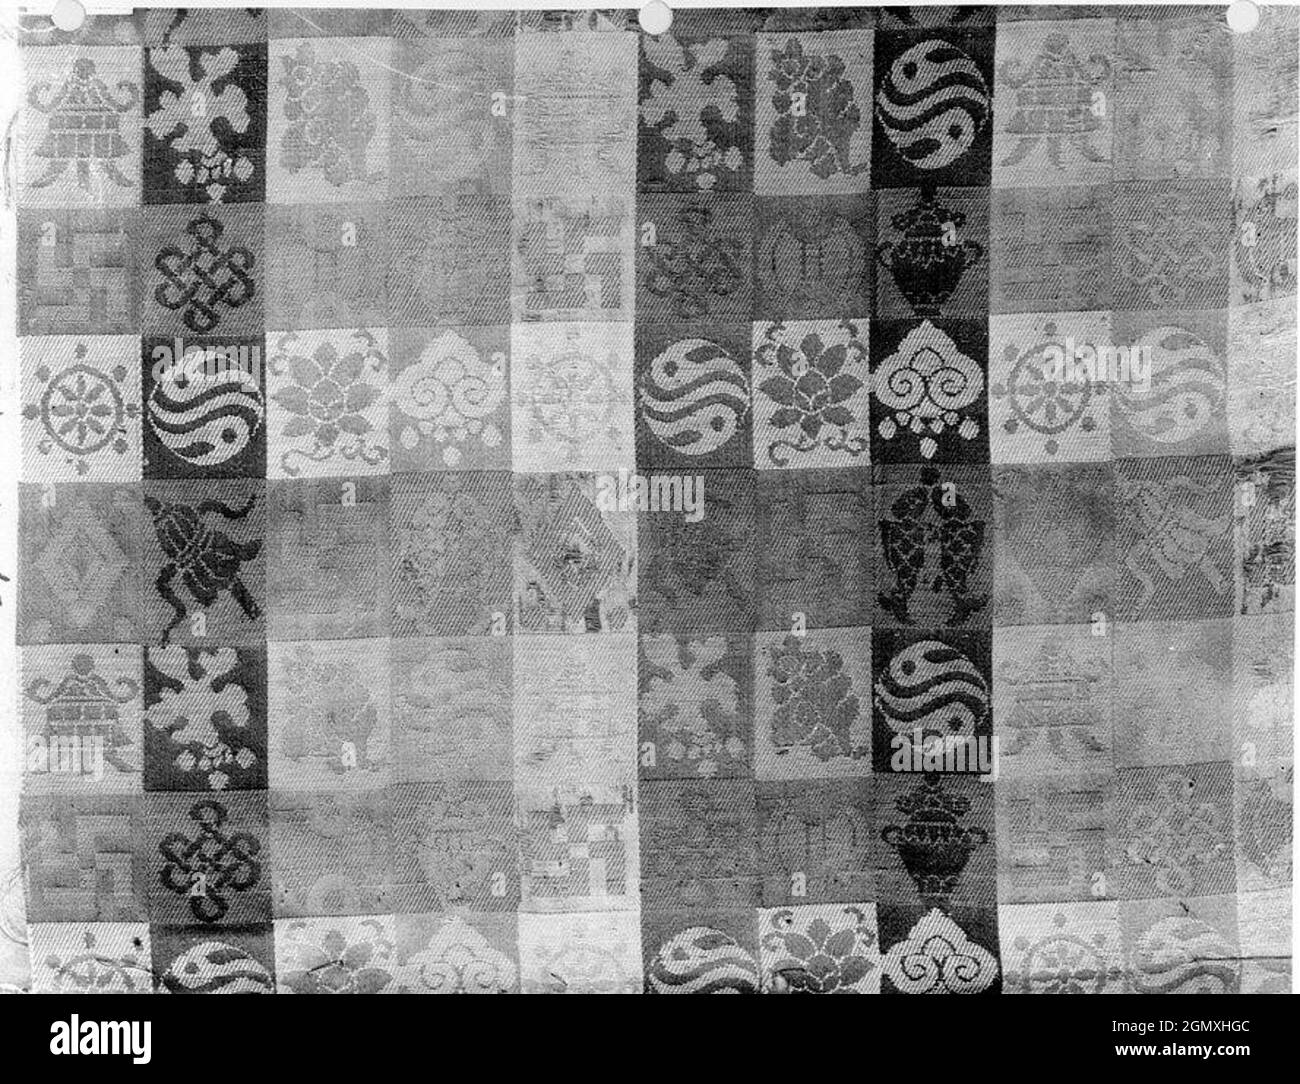 Fragment. Date: 17th-18th century; Culture: China; Medium: Silk; Dimensions: 8 1/2 x 11 1/4 in. (21.59 x 28.57 cm); Classification: Textiles-Woven Stock Photo